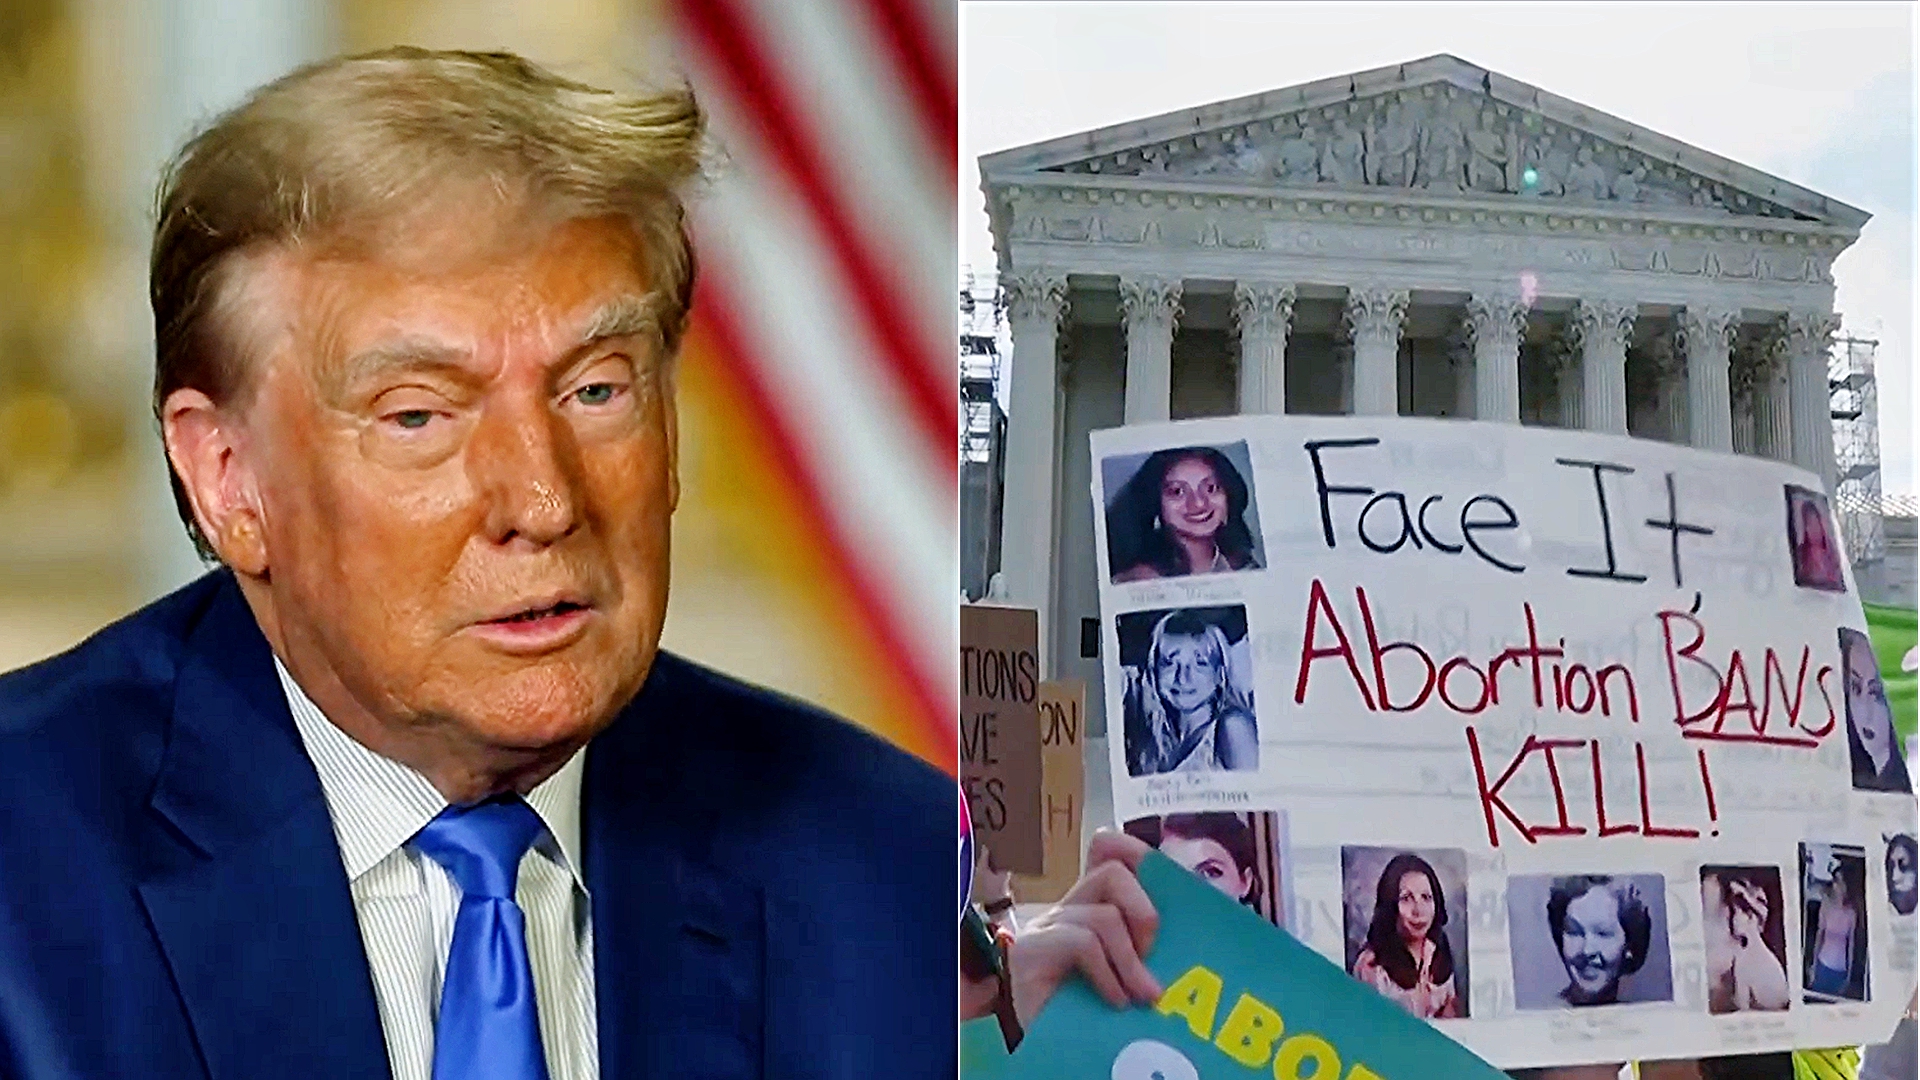 Trump Refuses To Say He’d Veto National Abortion Ban — Or Giving ‘Full Legal Rights’ At Conception — In Stunning Exchange